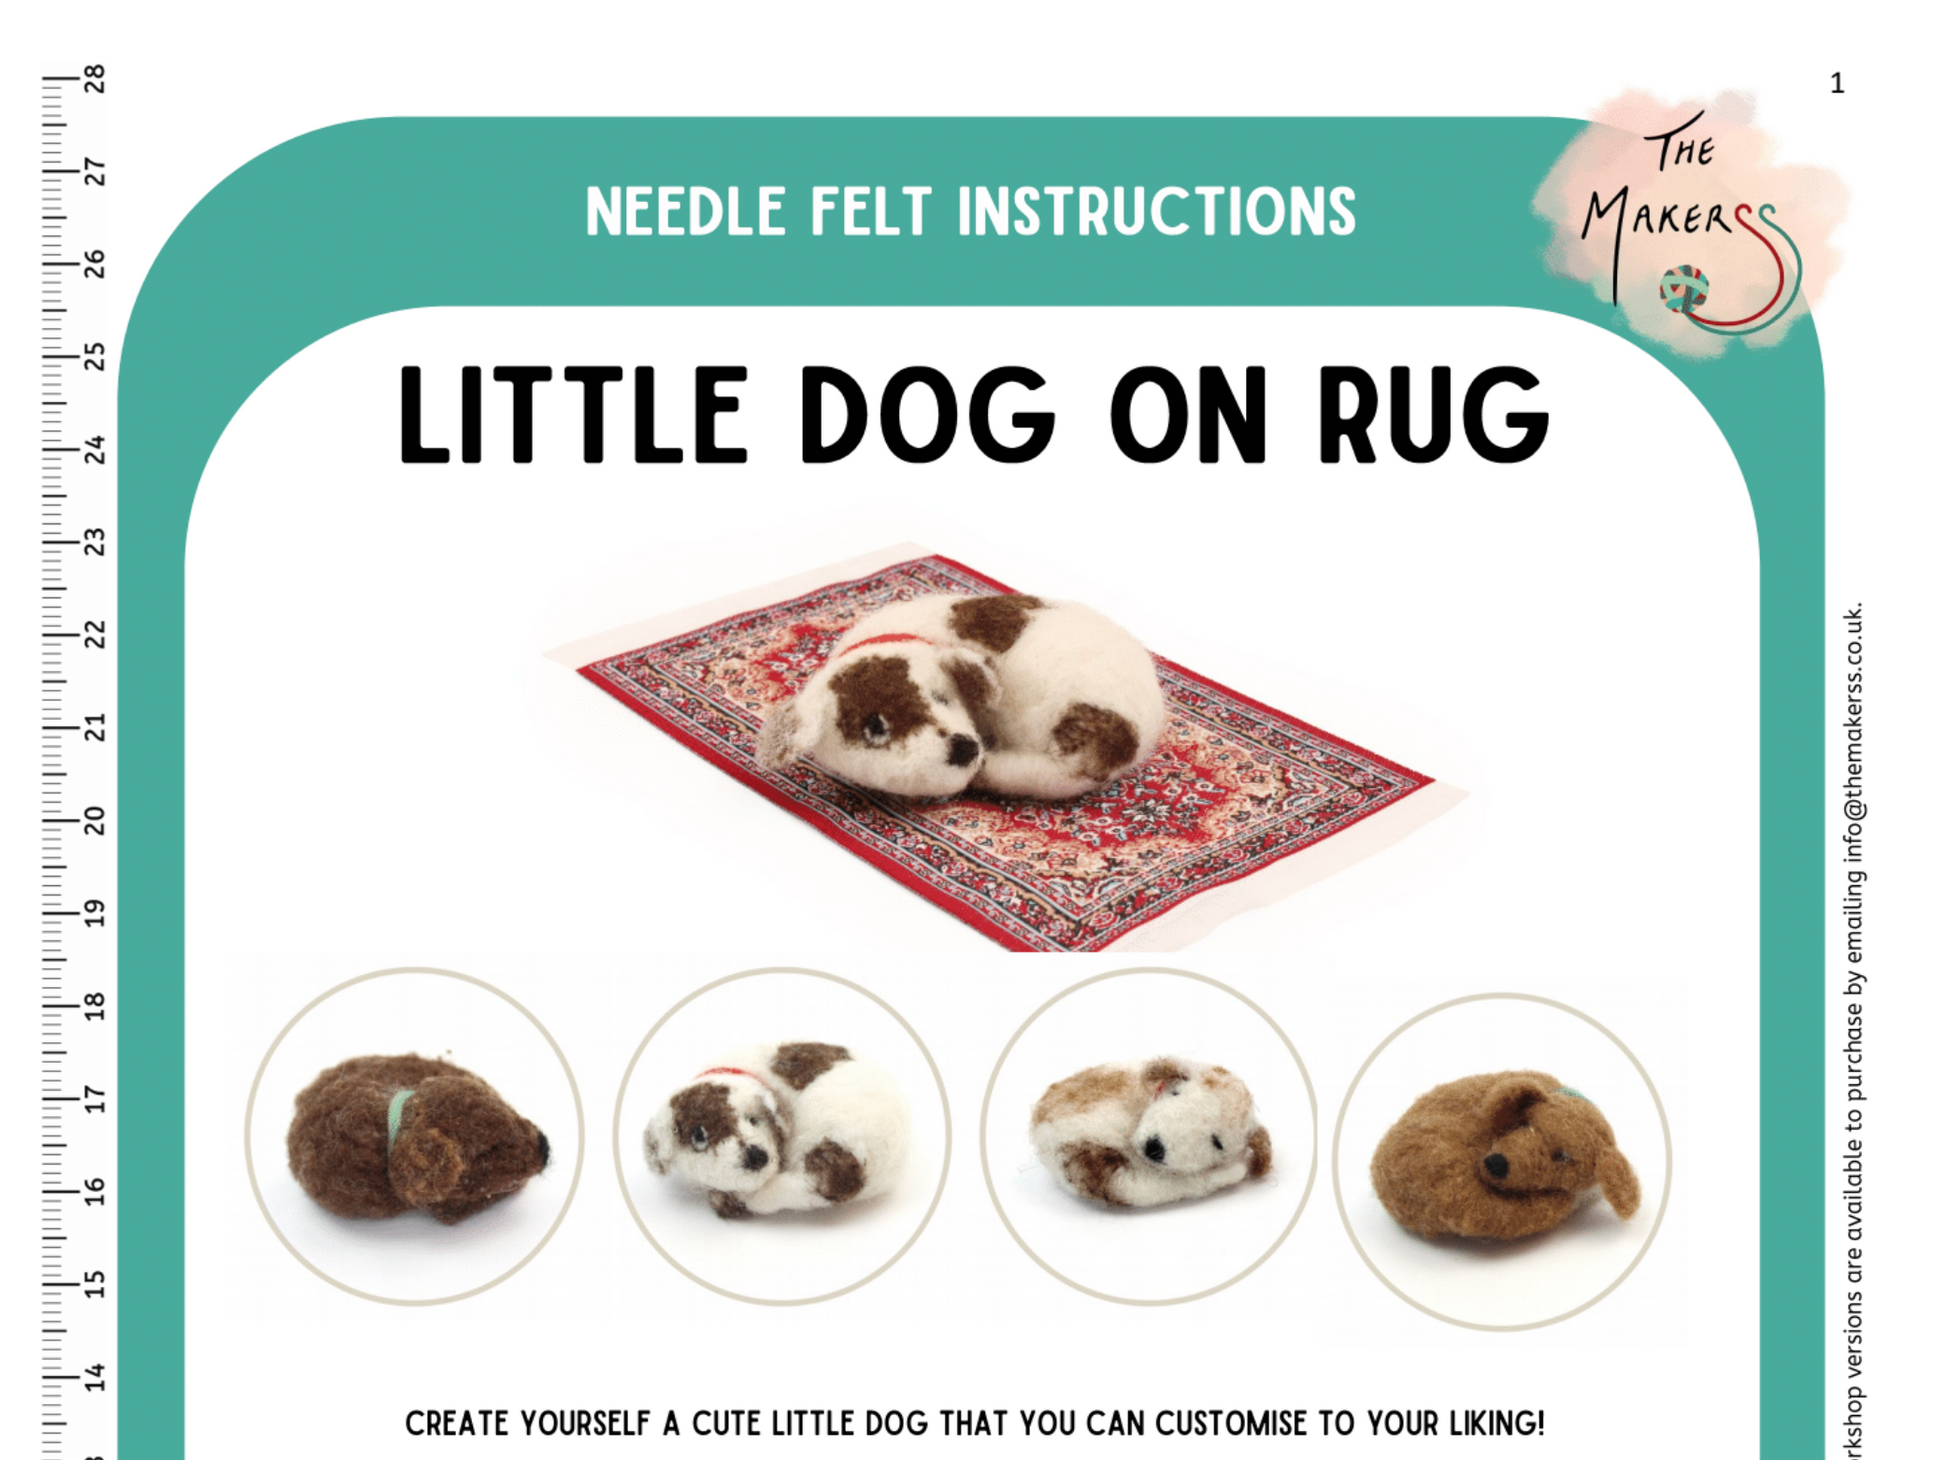 Little Dog on Rug Instructions PDF - The Makerss